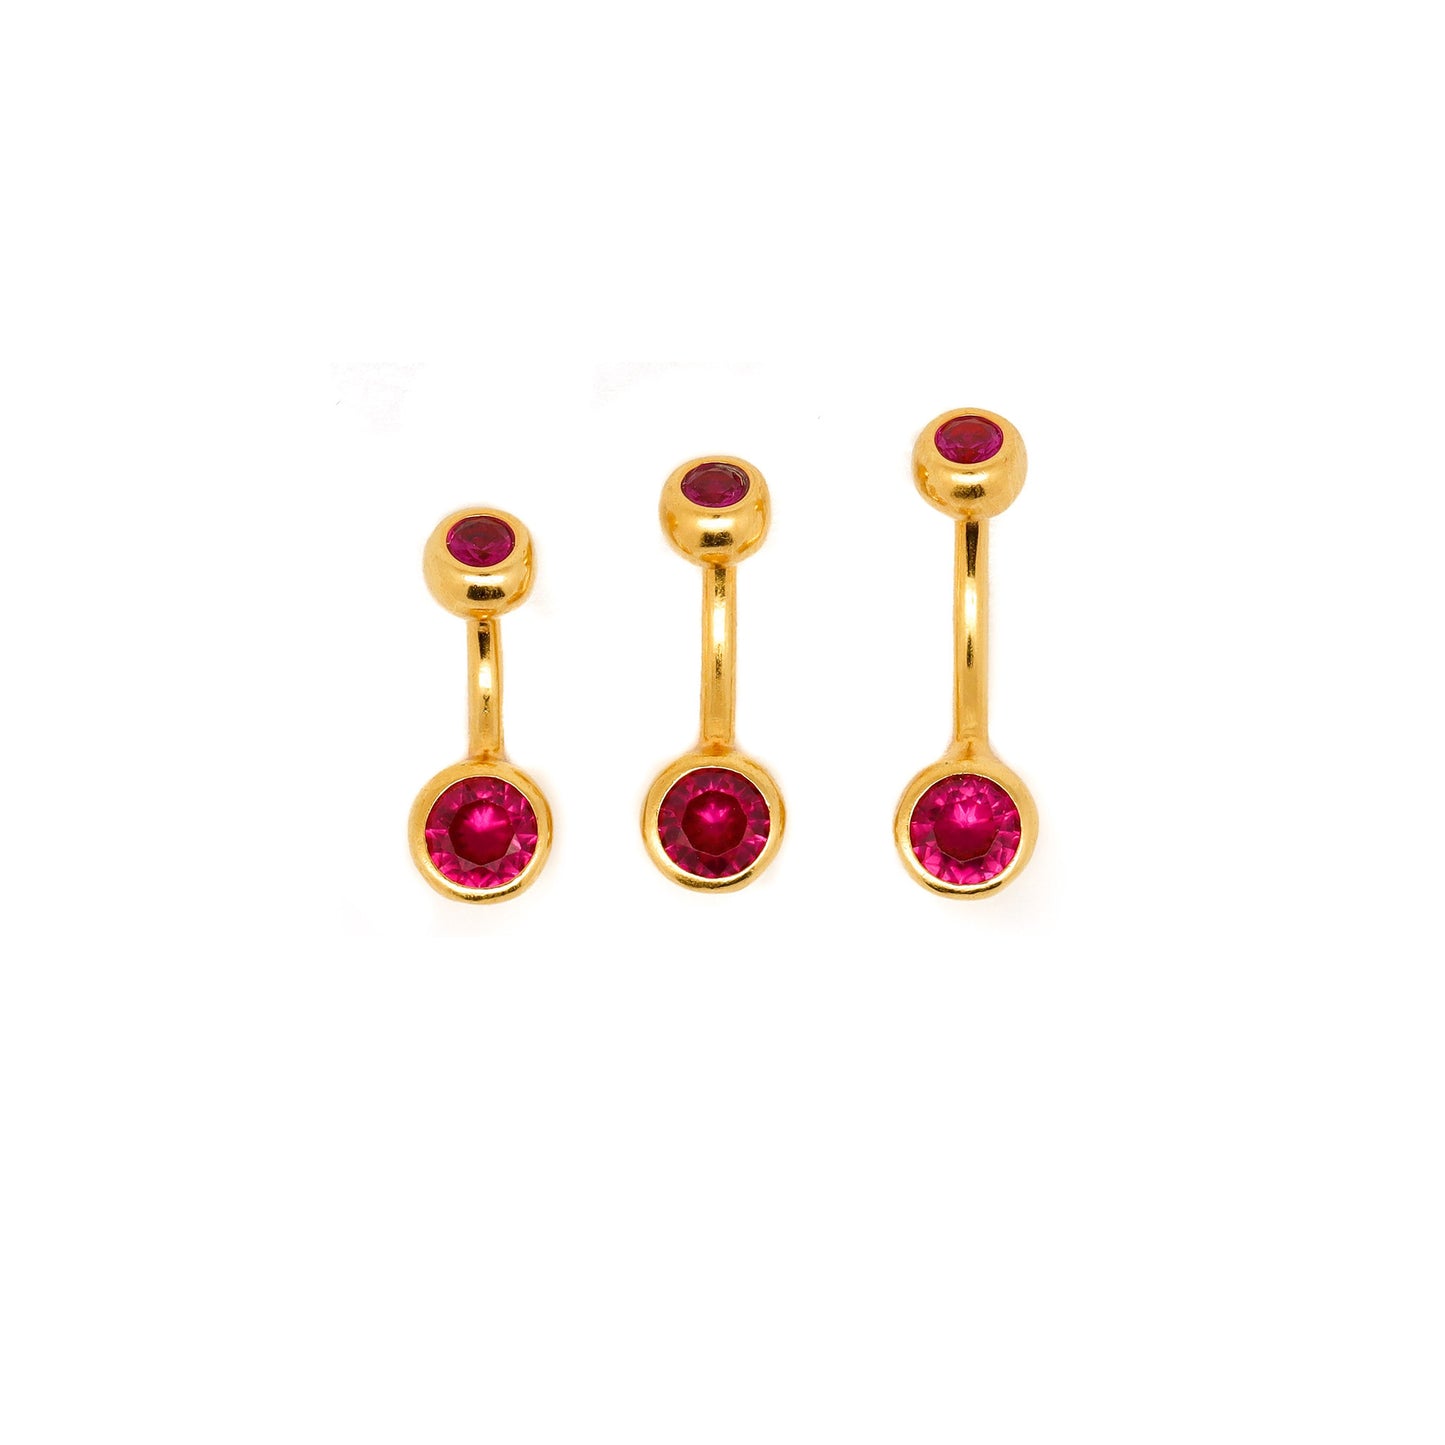 Vermeil | 24k Gold Coated 925 Silver Small Belly Ring with Berry Pink Cubic Zirconia Crystals | 6mm 1/4" 8mm 5/16" 10mm 3/8" - Sturdy South